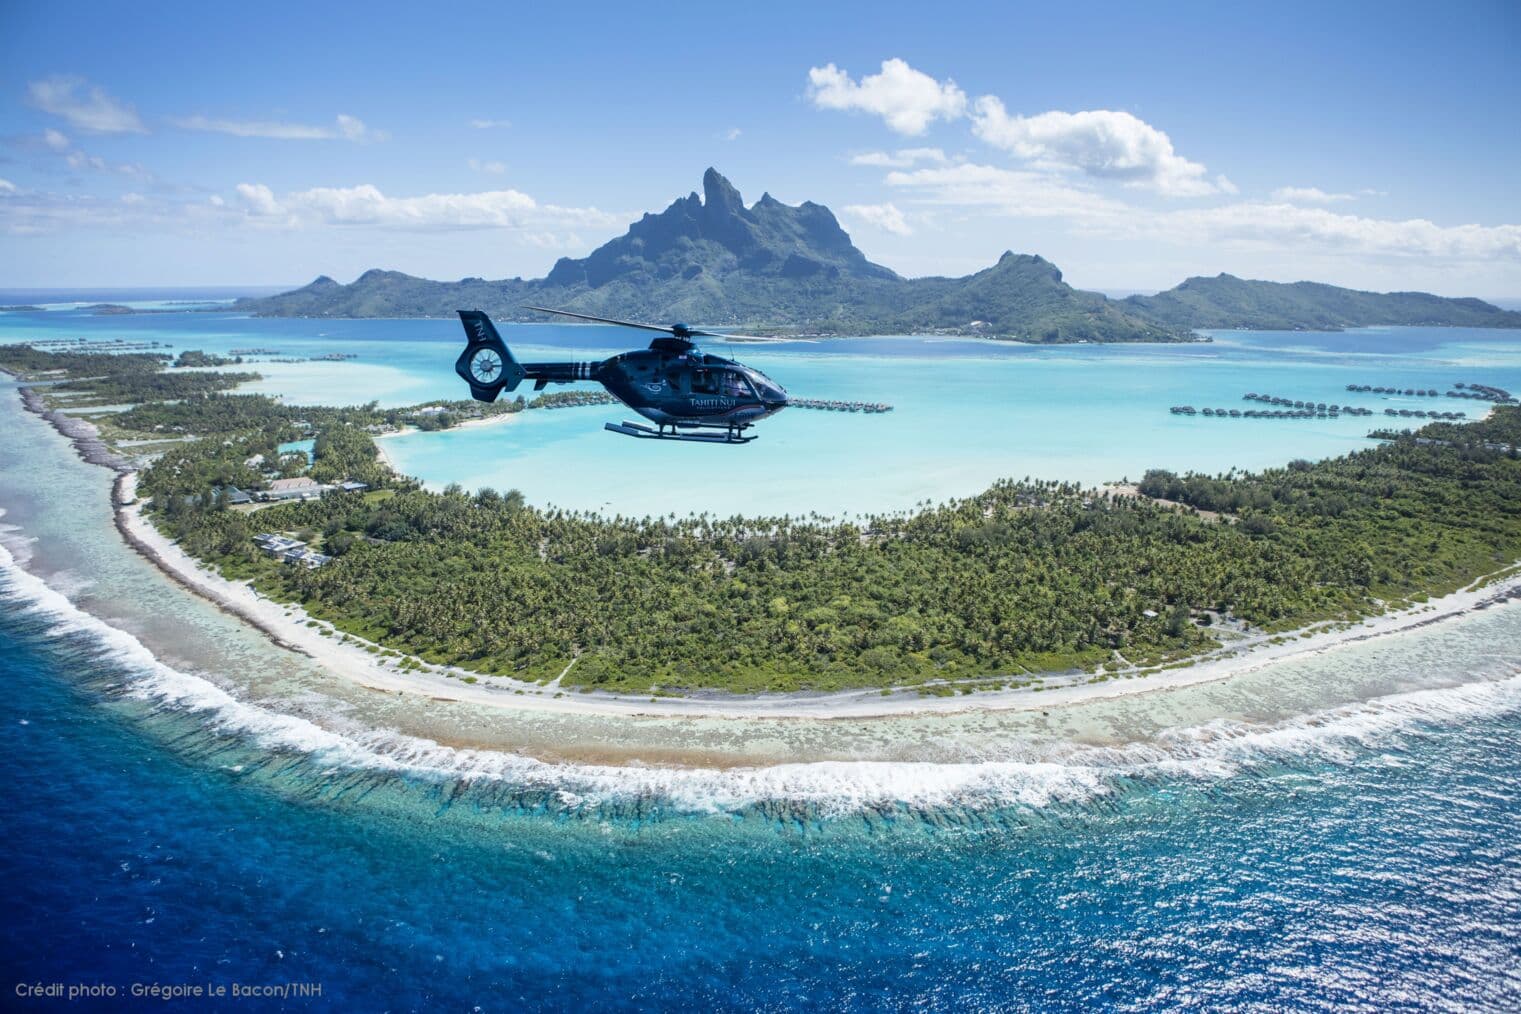 Helicopter Tour in Bora Bora, come & fly with me! Review & tips